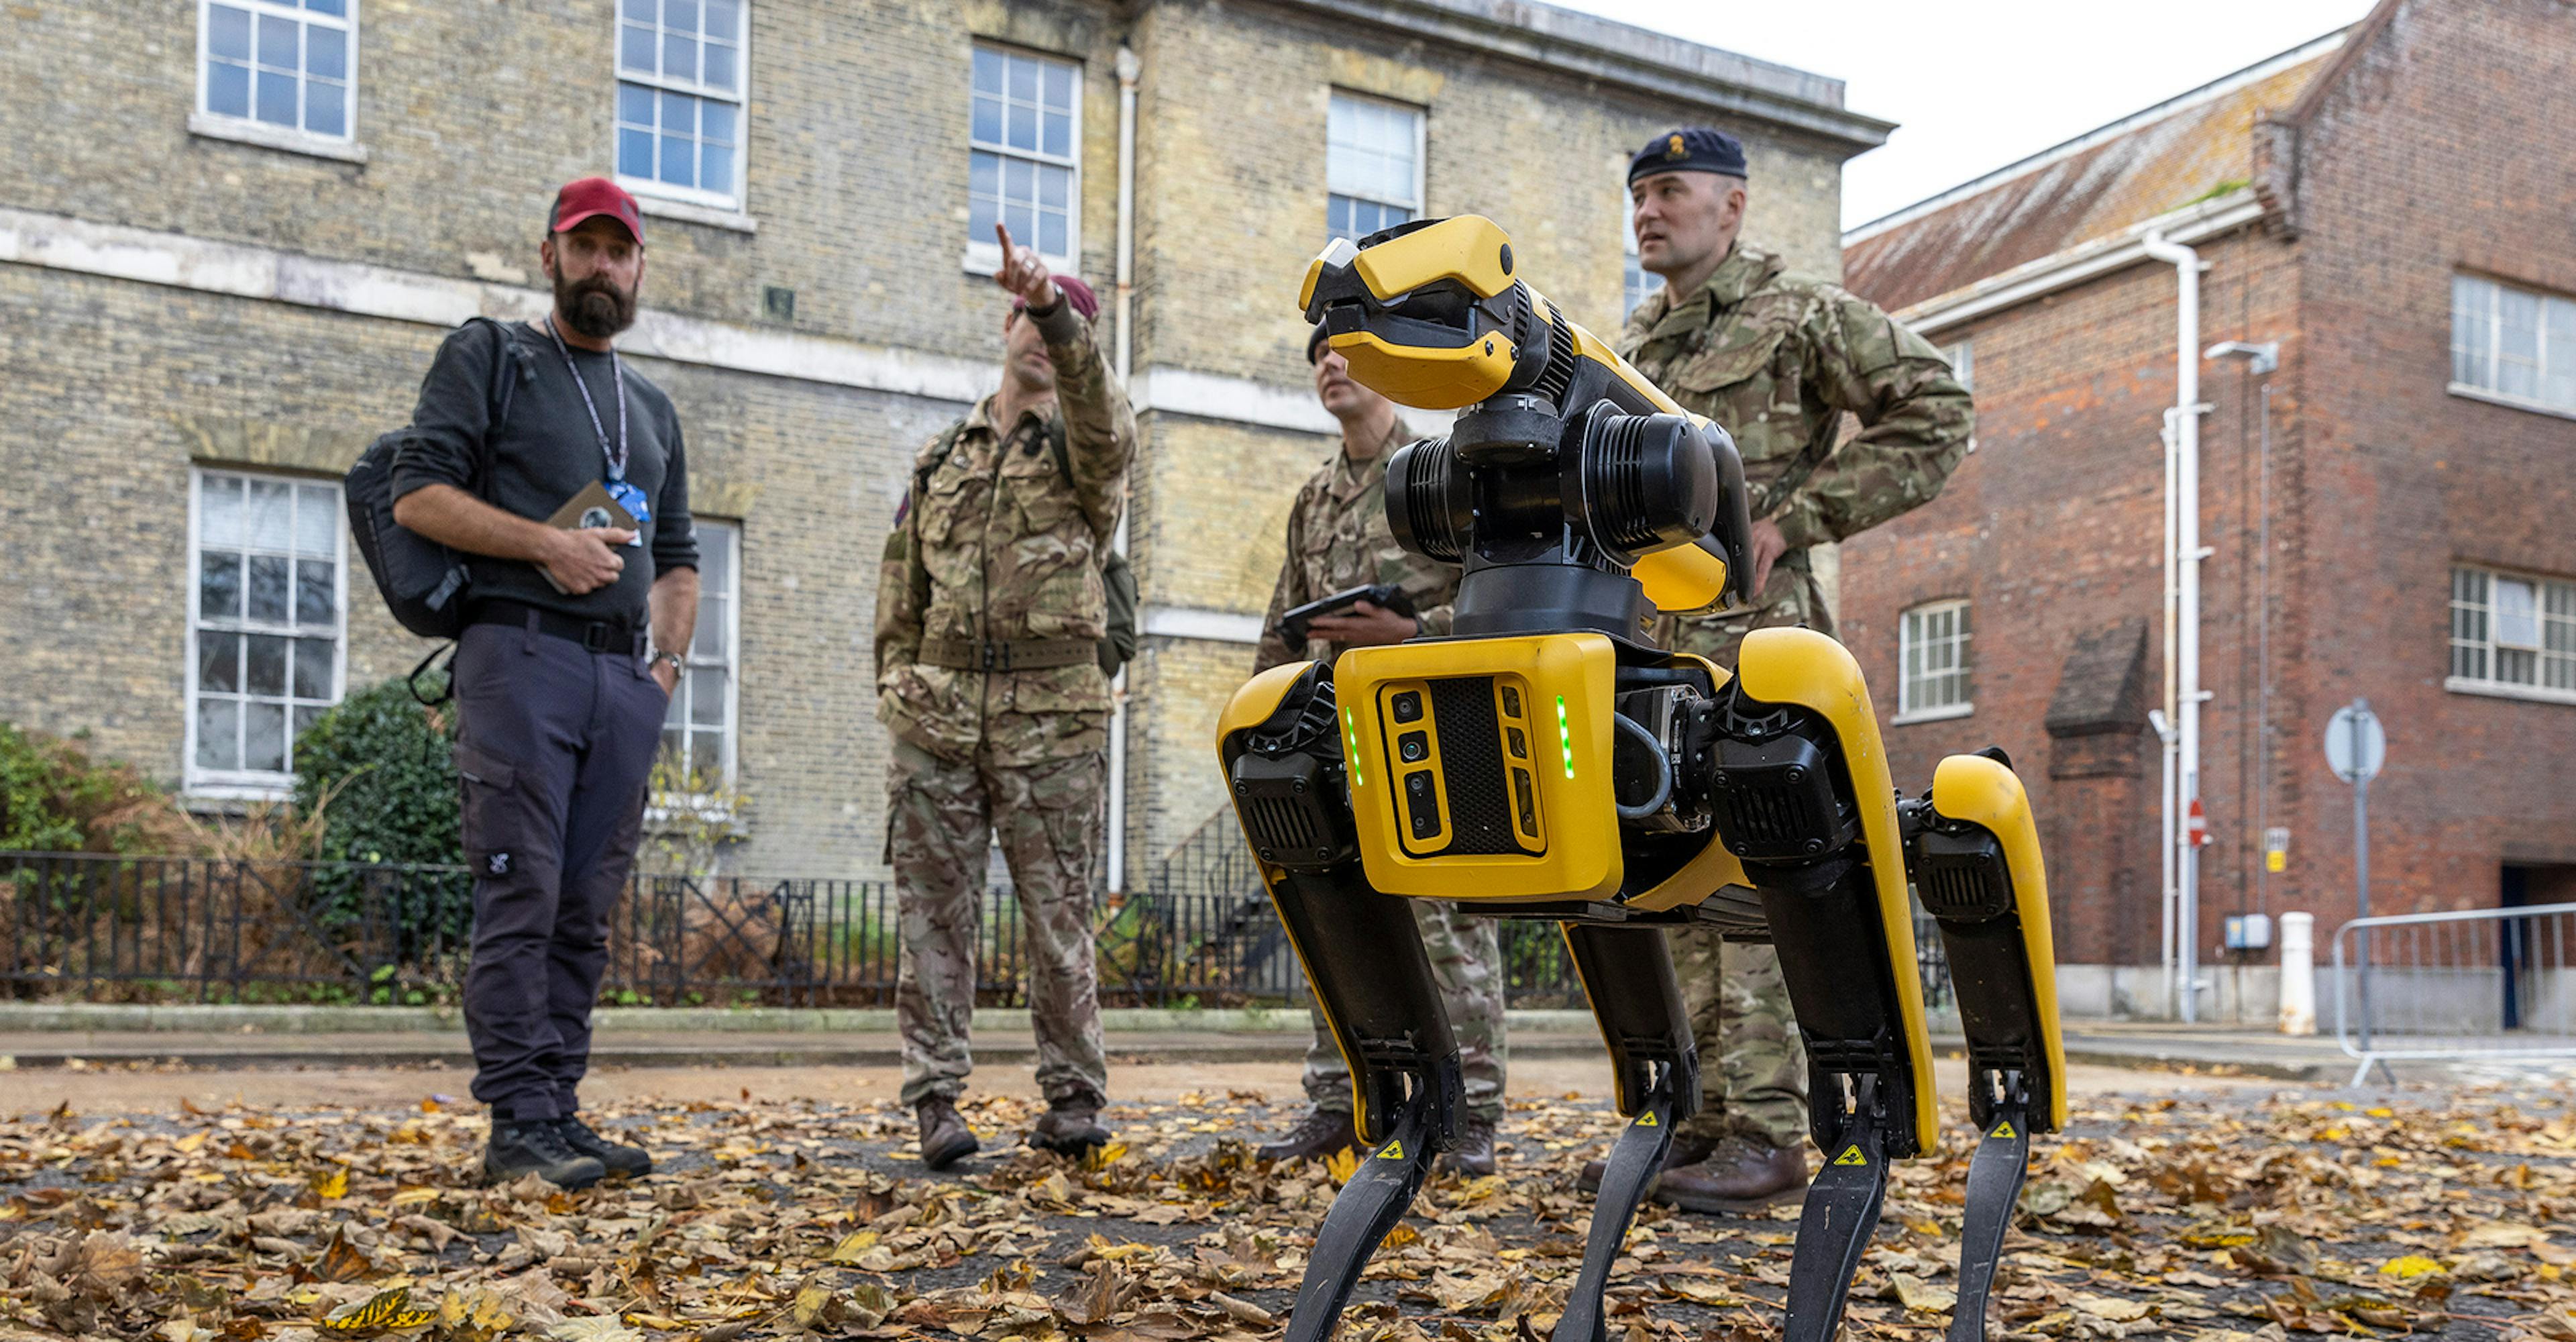 A man and two soldiers standing next to a robot, showcasing human-robot collaboration in military operations.